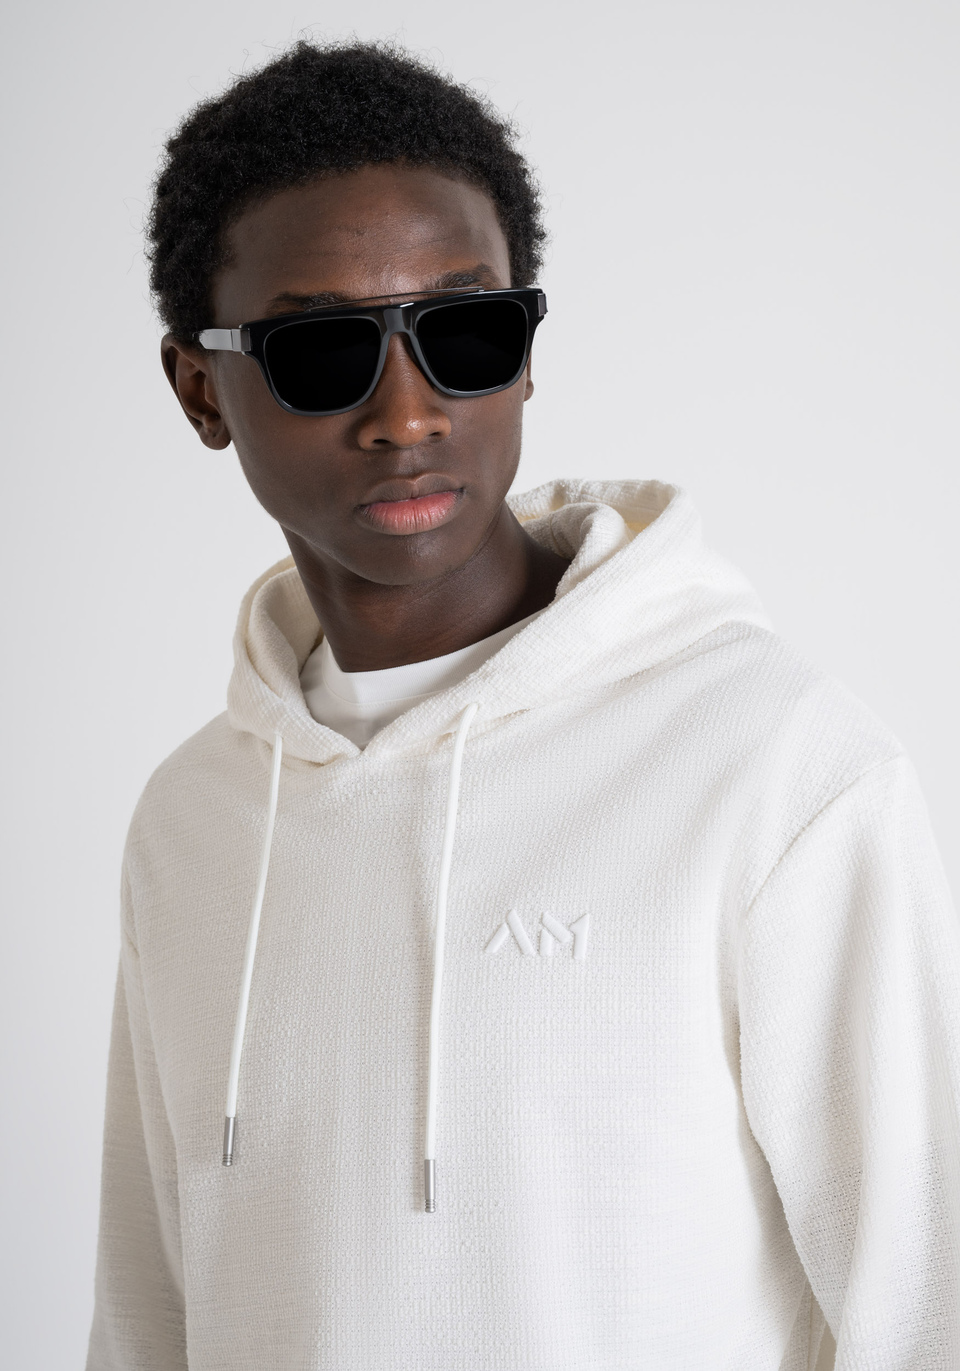 RELAXED FIT COTTON-BLEND ARMORED SWEATSHIRT WITH LOGO EMBROIDERY - Antony Morato Online Shop